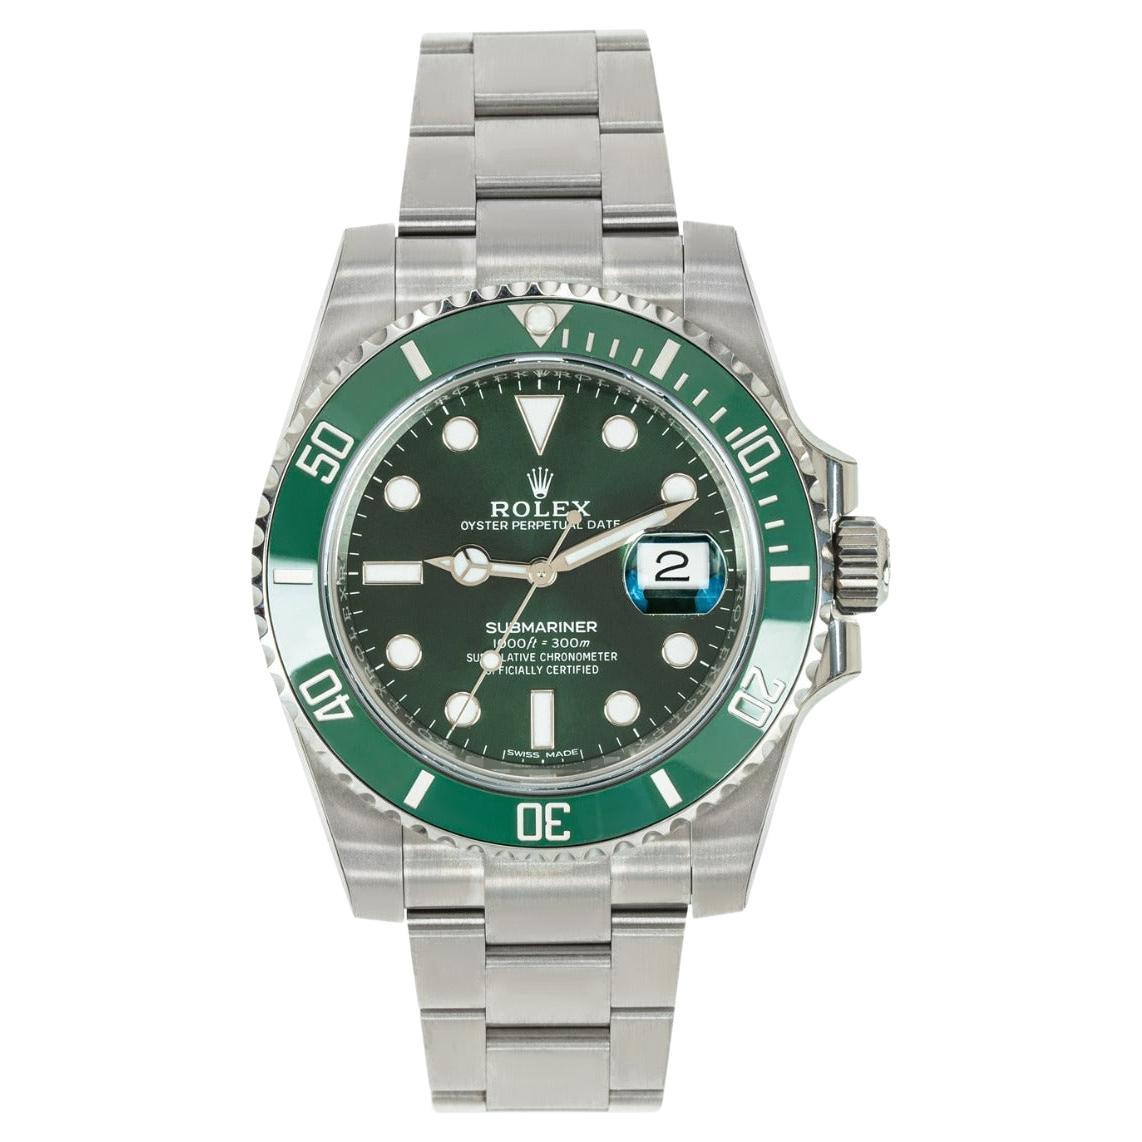 What is the green Submariner called?